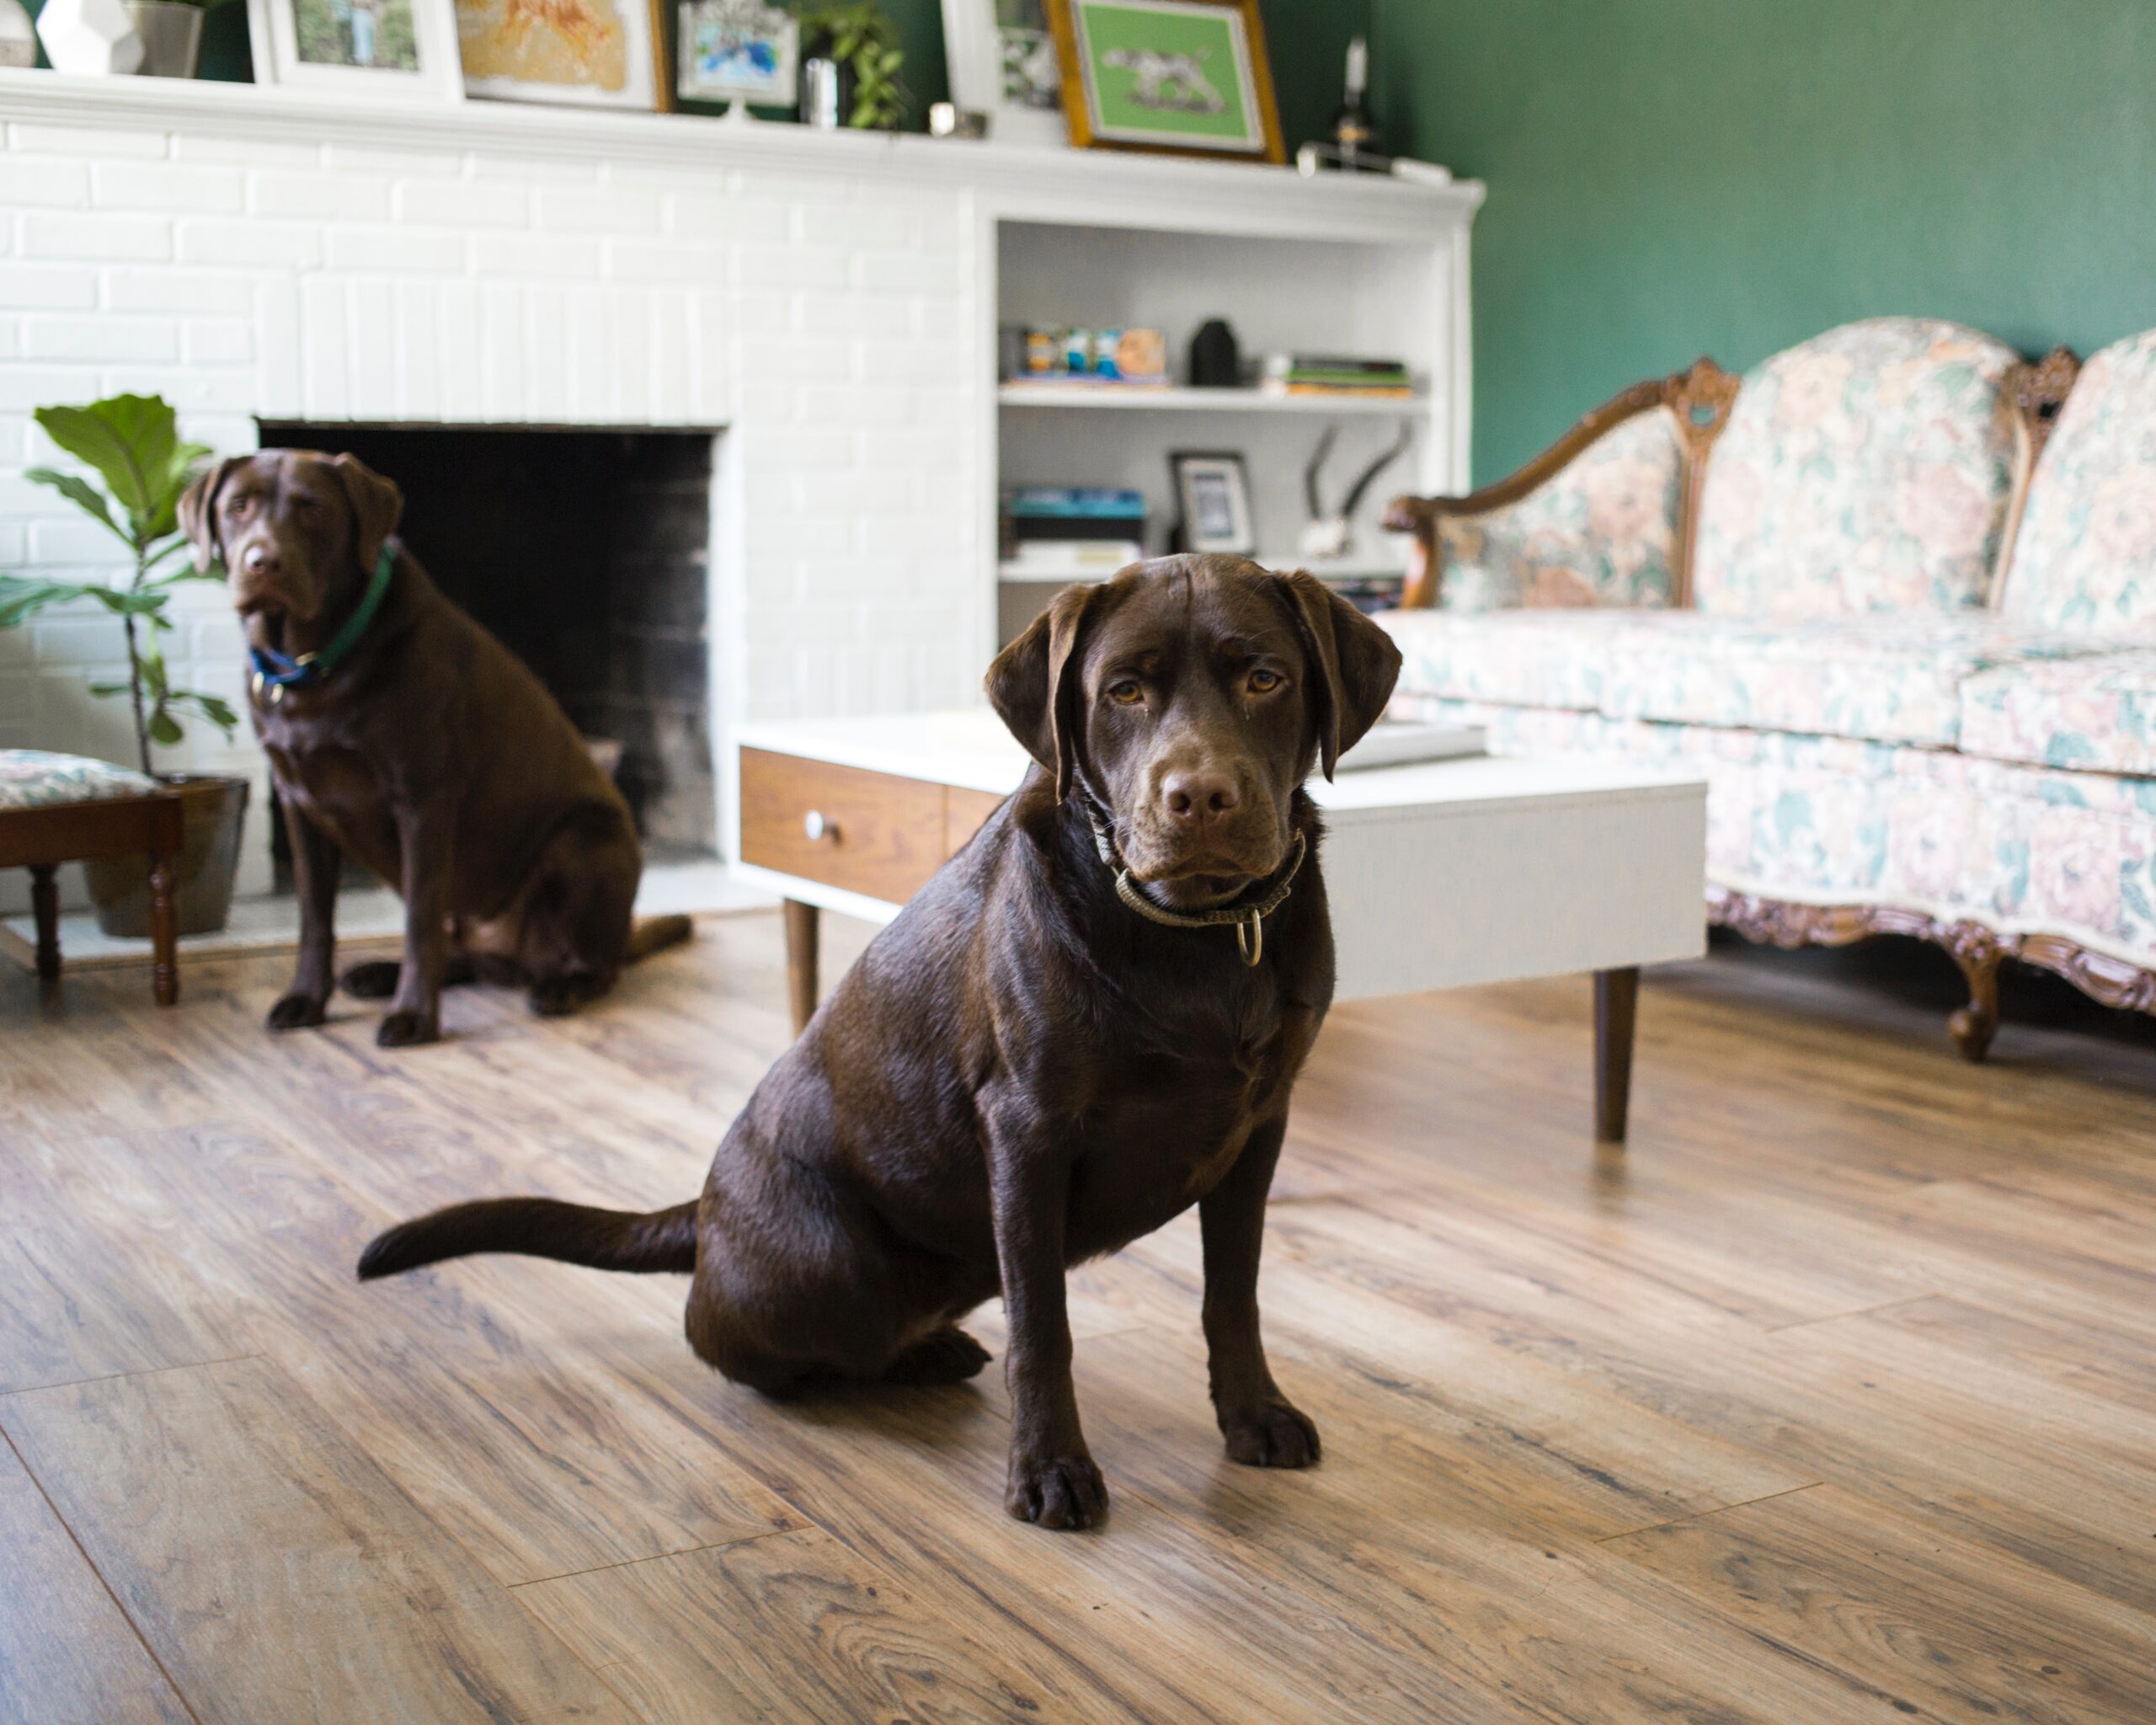 Can Labradors be left alone for 8 hours?